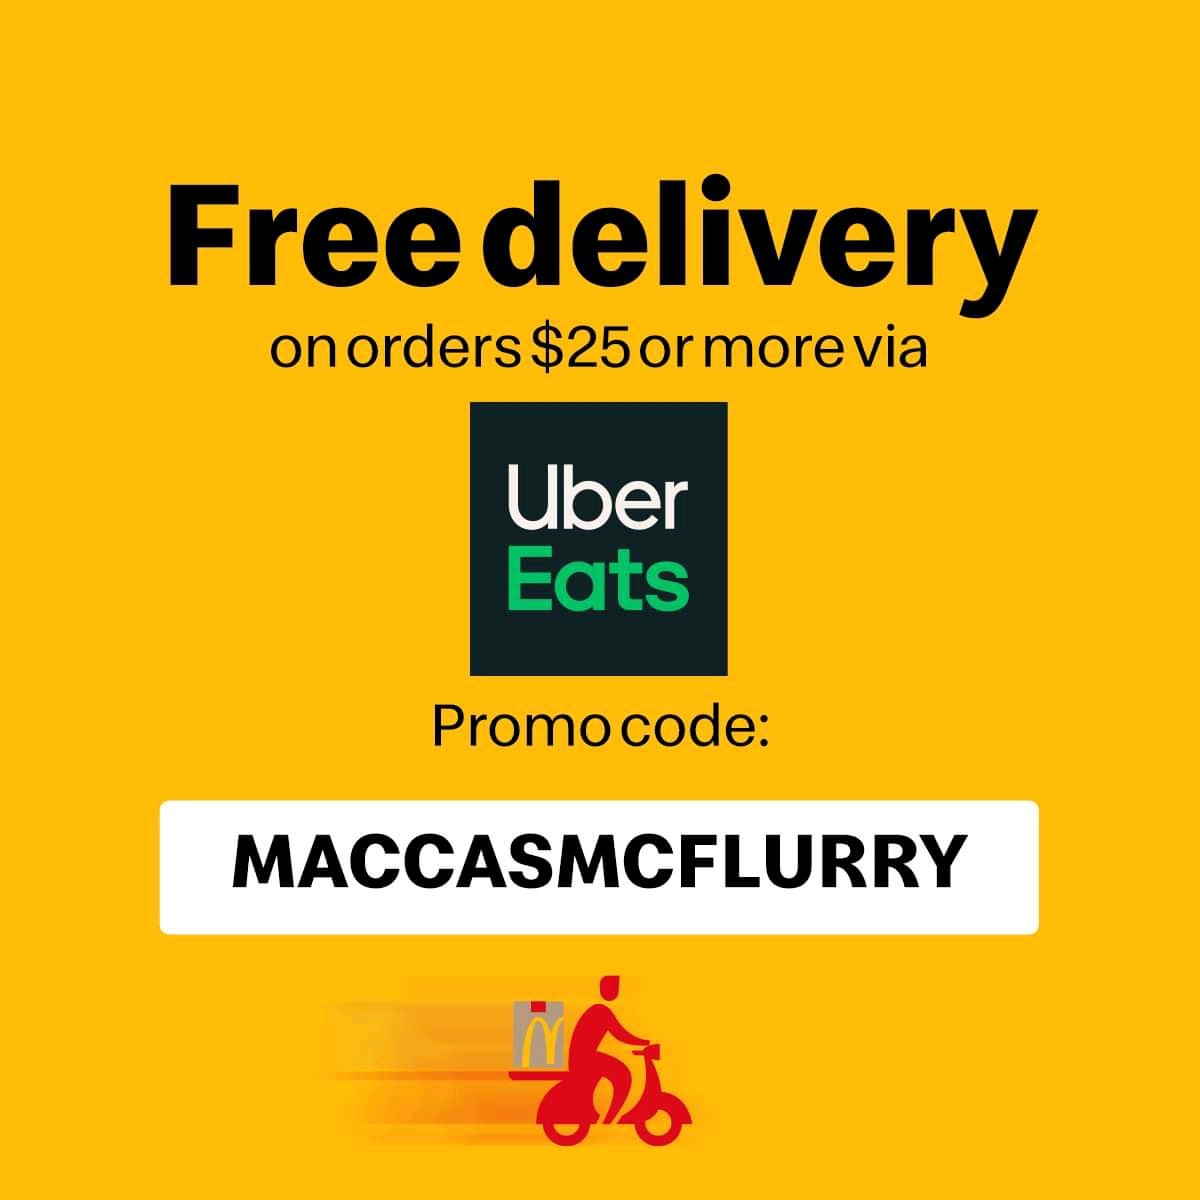 Deal Mcdonald S Free Delivery On Orders Over 25 Via Uber Eats Frugal Feeds